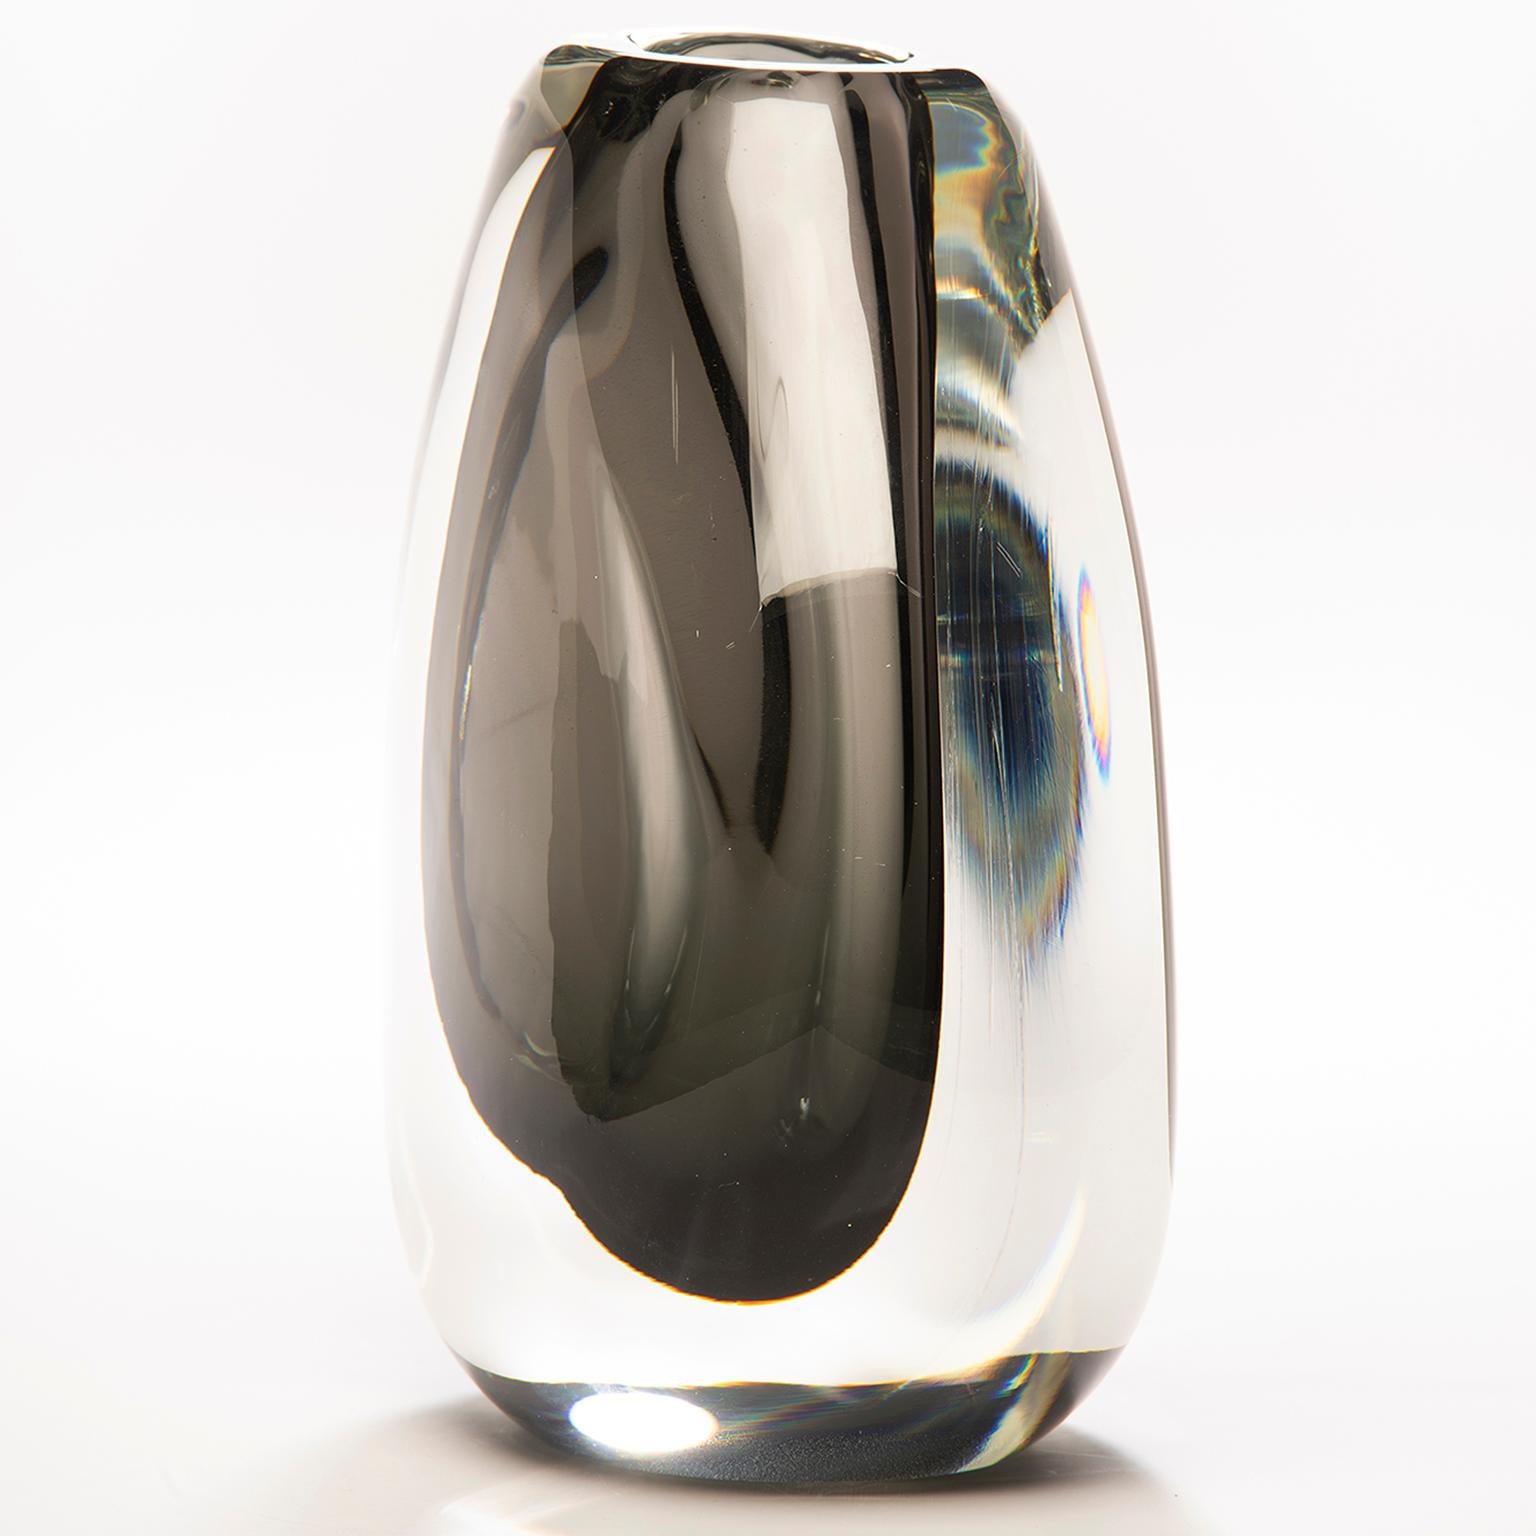 Hand blown in Finland, this Sommerso style art glass vase has a heavy, clear cased glass outer layer and smoke colored core. New with no flaws found.